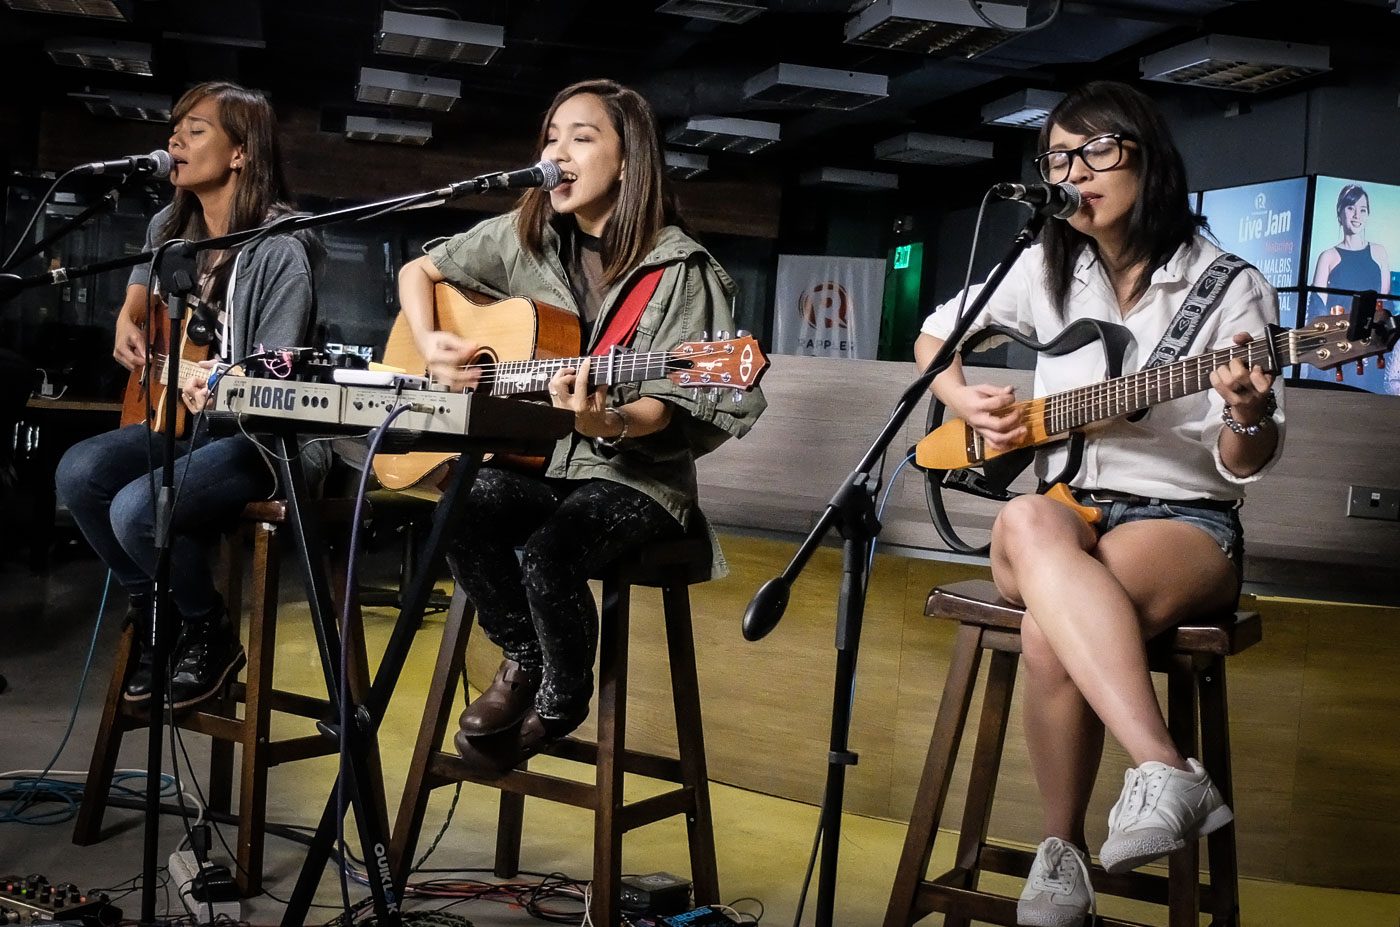 Aia de Leon, Barbie Almalbis, and Kitchie Nadal hold online concert for music venue workers